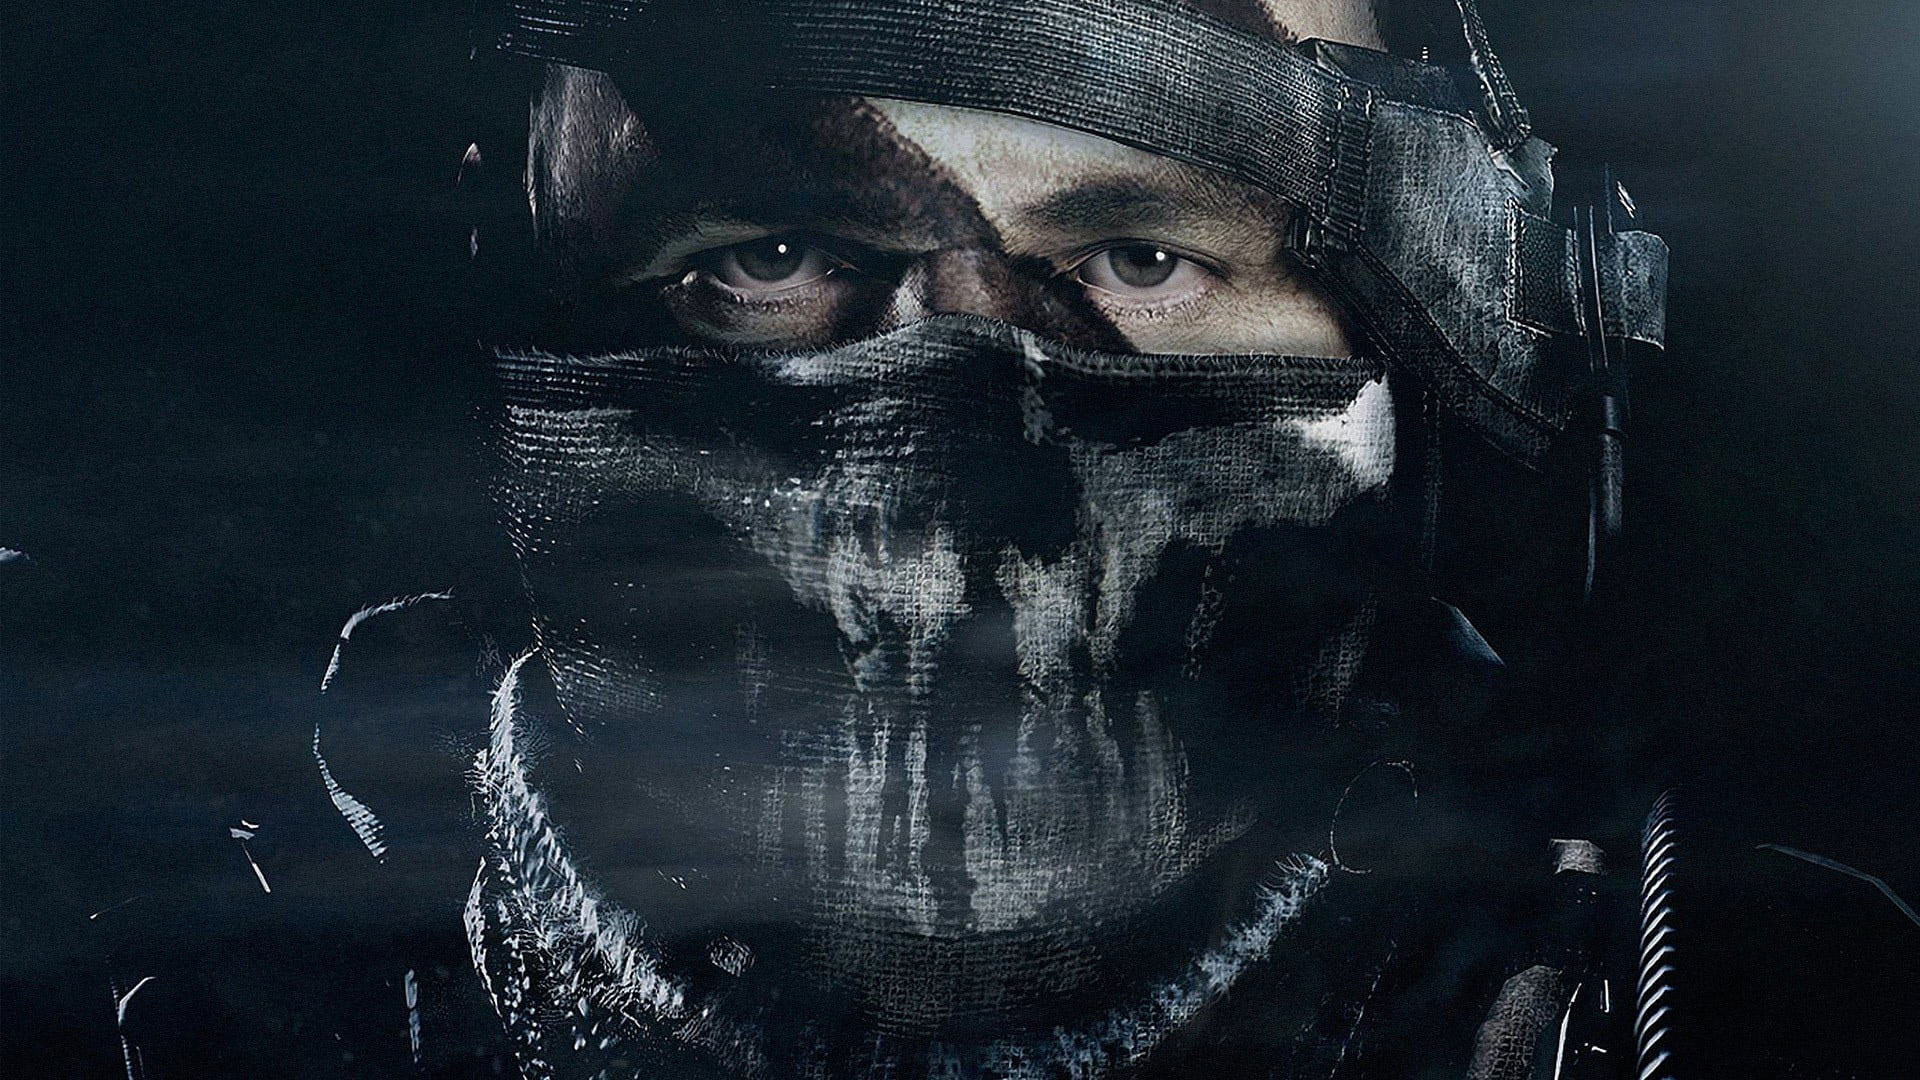 Wallpaper Black And White Face Mask, Rainbow Six Siege